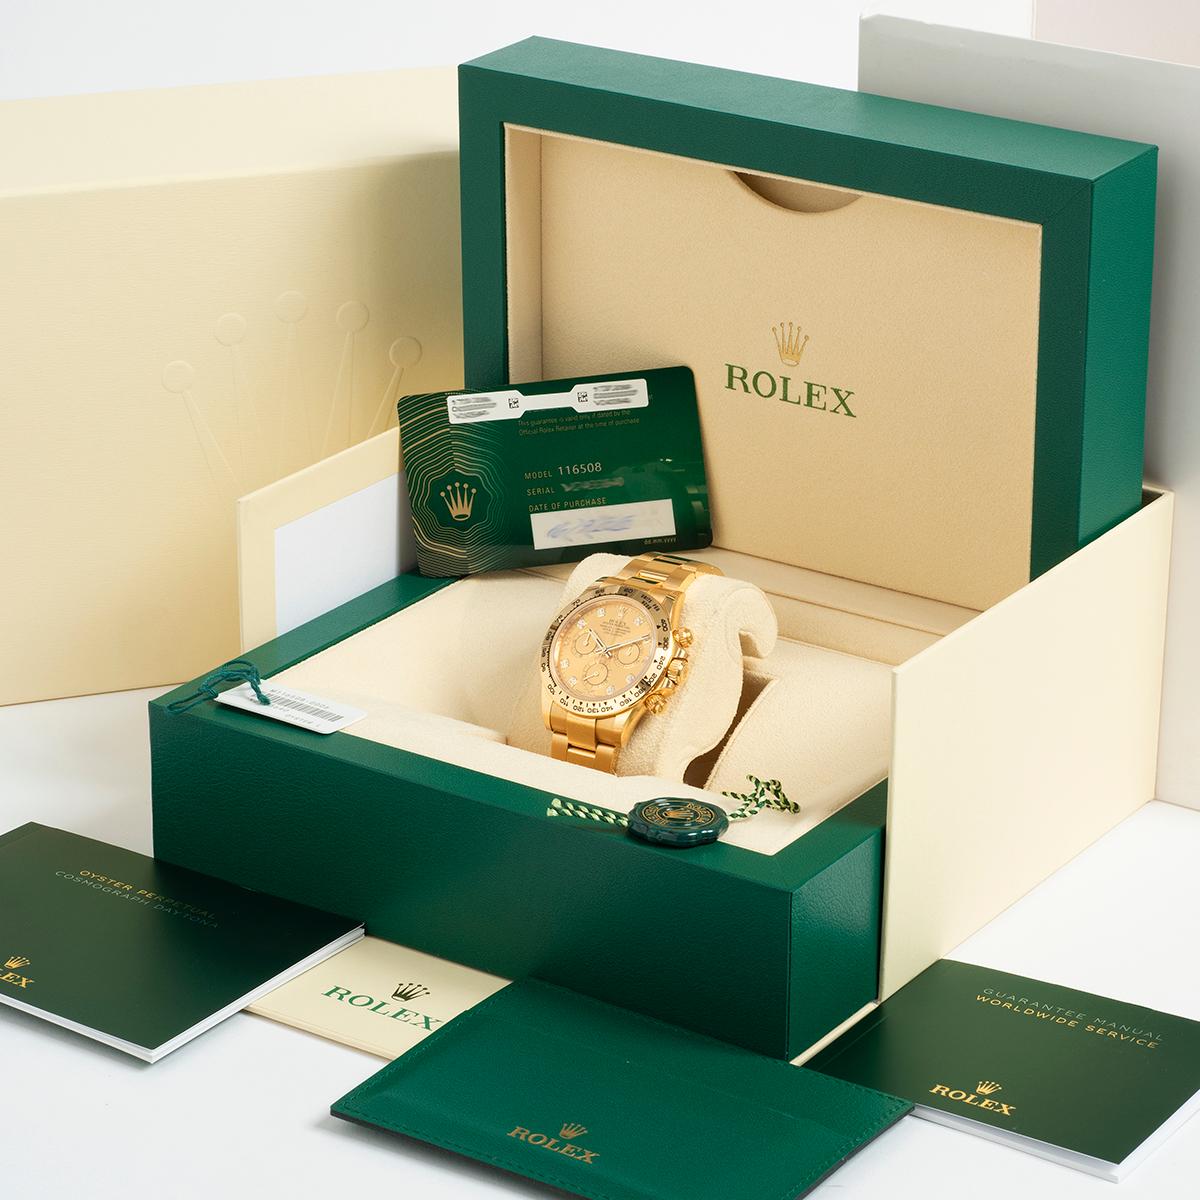 Our stunning Rolex Daytona reference 116508 features a 18k yellow gold case and bracelet and has a factory champagne and diamond dial. This highly sought after reference is a complete set, comprising inner and outer box with sleeve, swing tag x 2